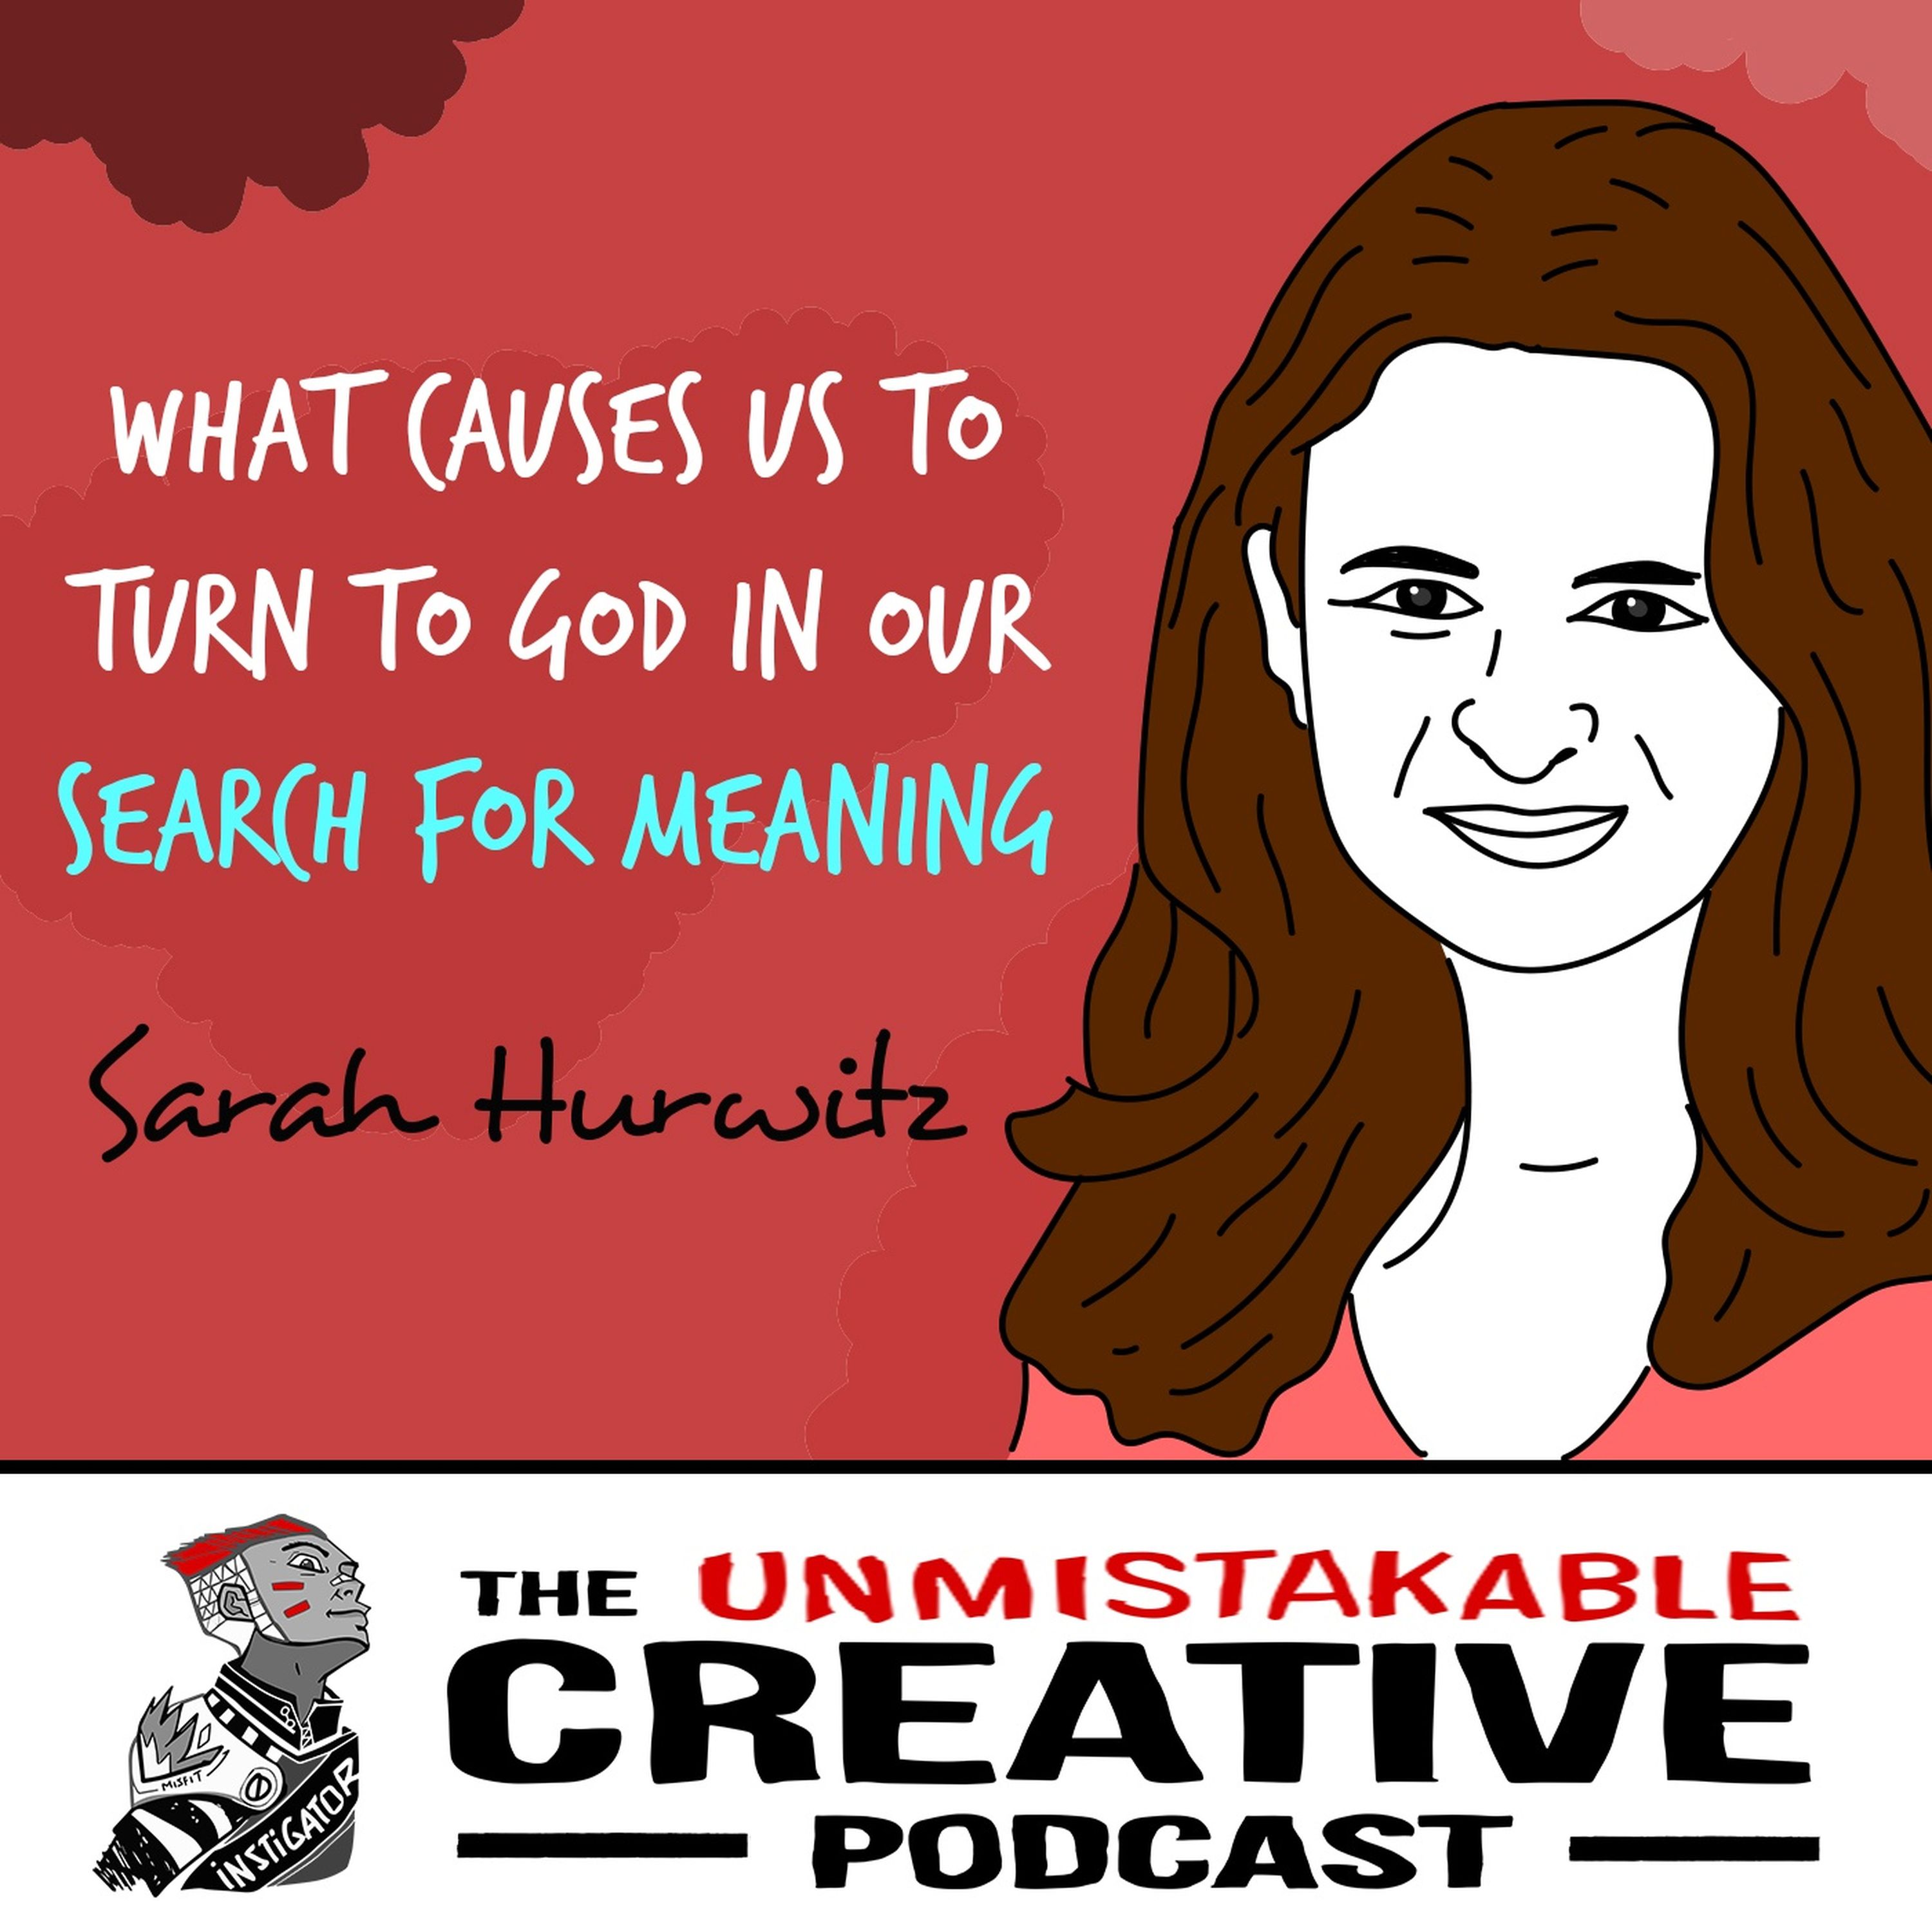 Sarah Hurwitz: What Causes Us to Turn to God in Our Search for Meaning Image